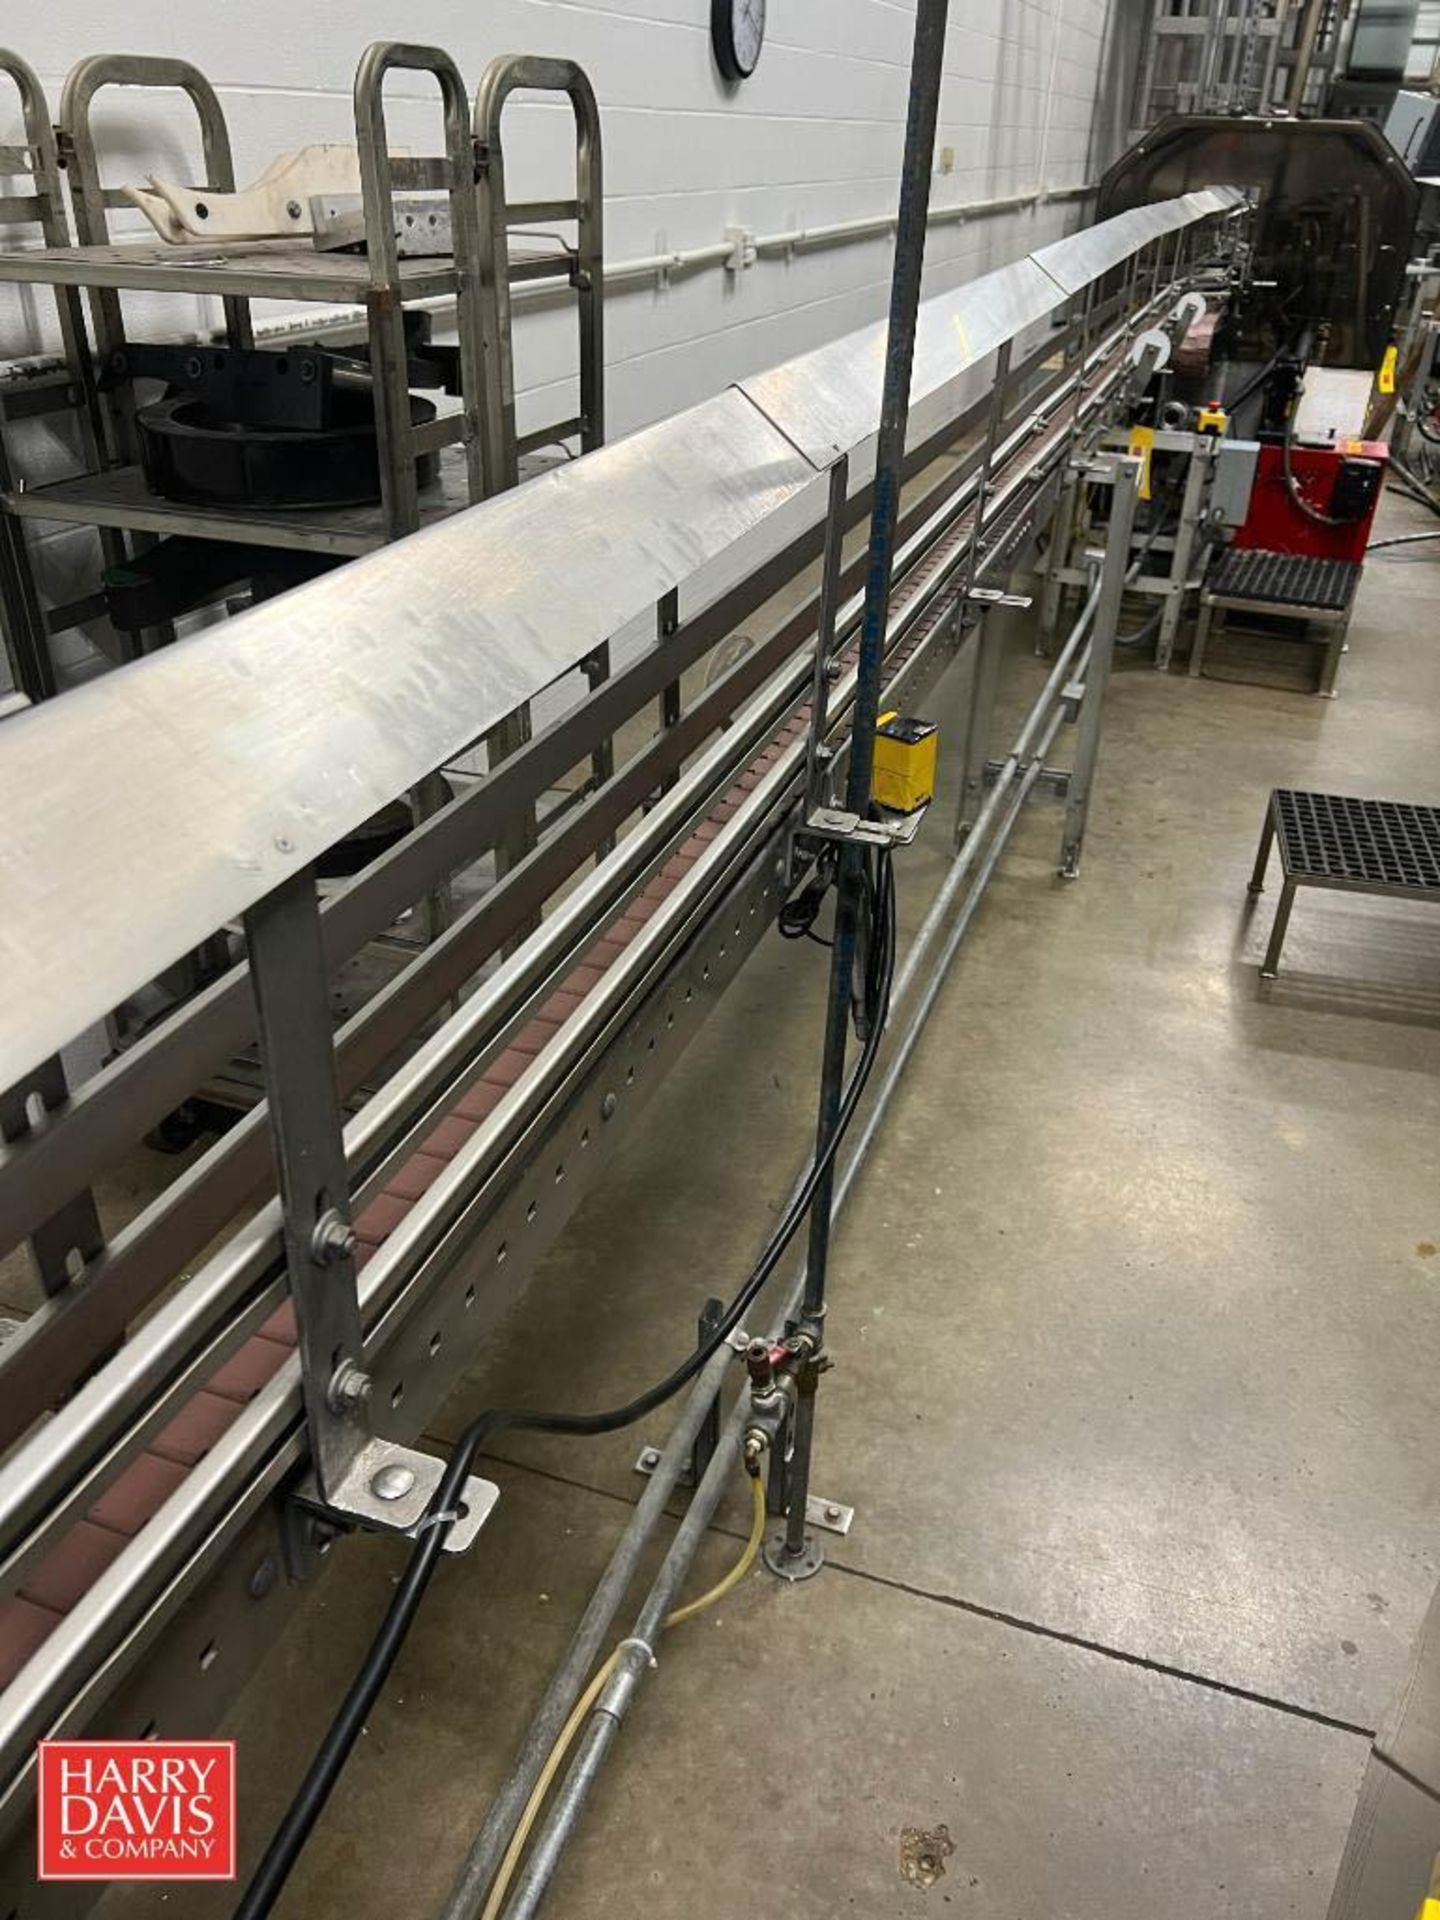 S/S Framed Power Conveyor with S/S Hood, Dimensions = 20' x 3.5" - Rigging Fee: $600 - Image 2 of 2